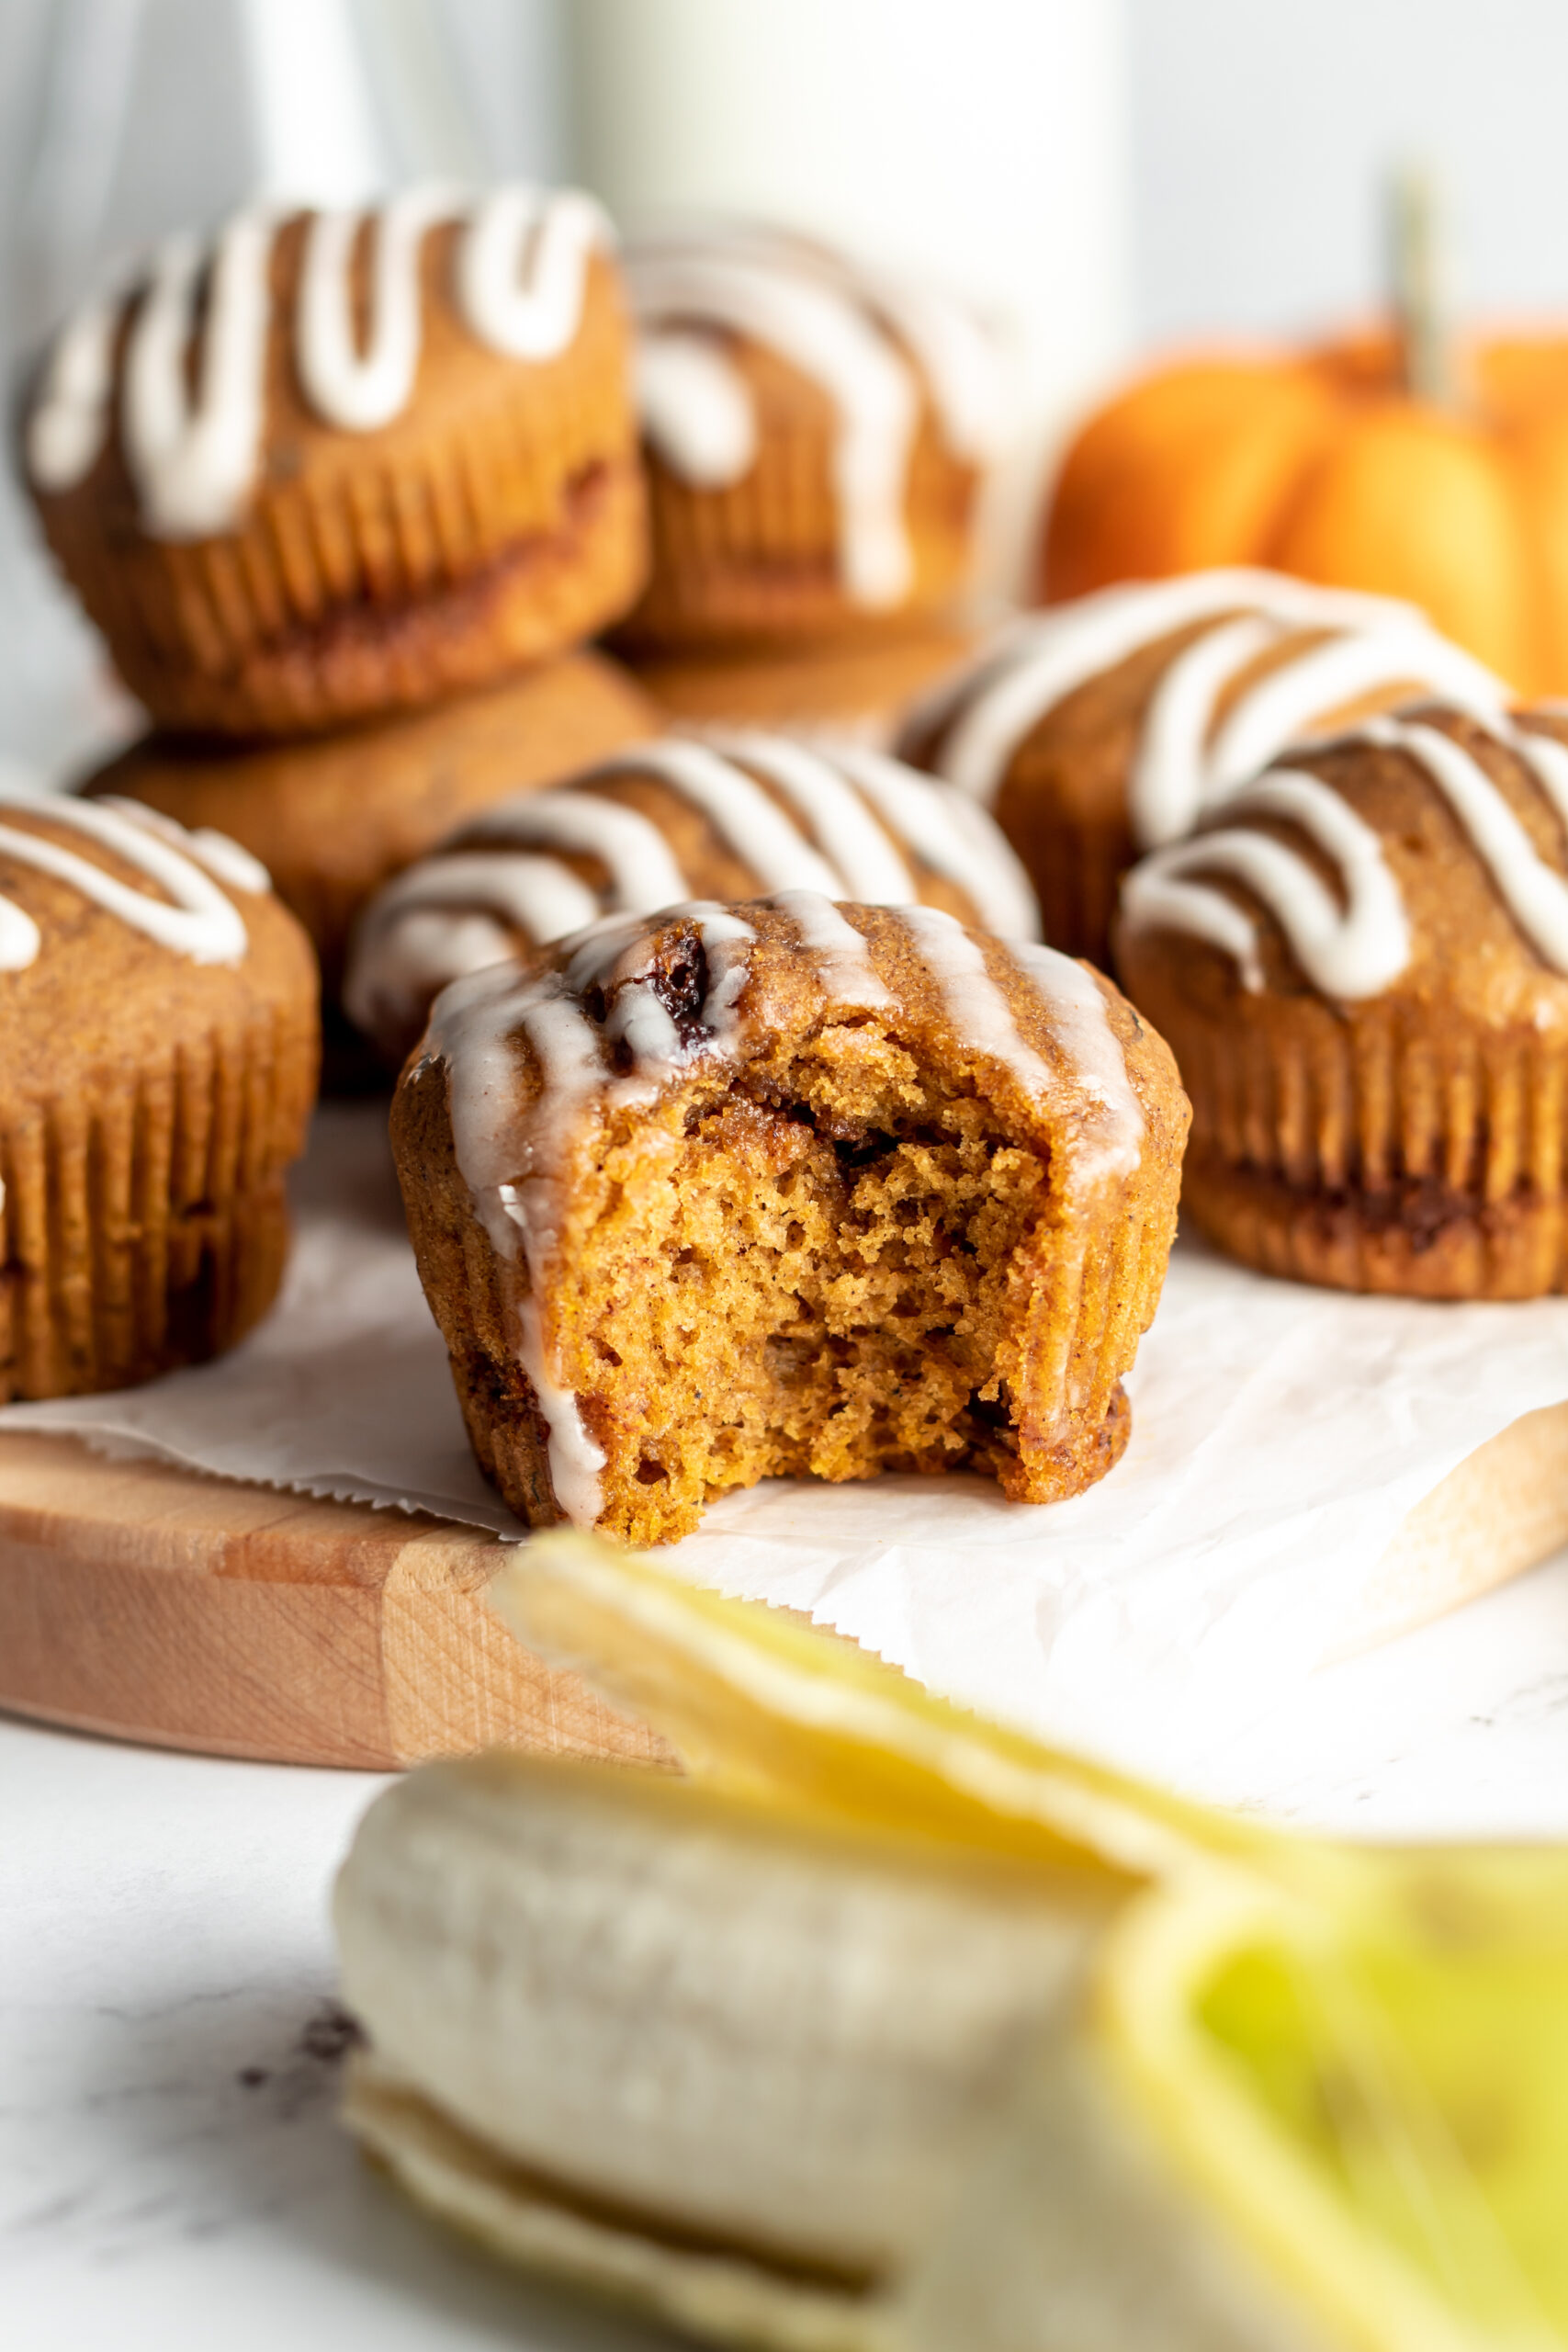 Pumpkin muffins with cinnamon in the middle and icing on top.